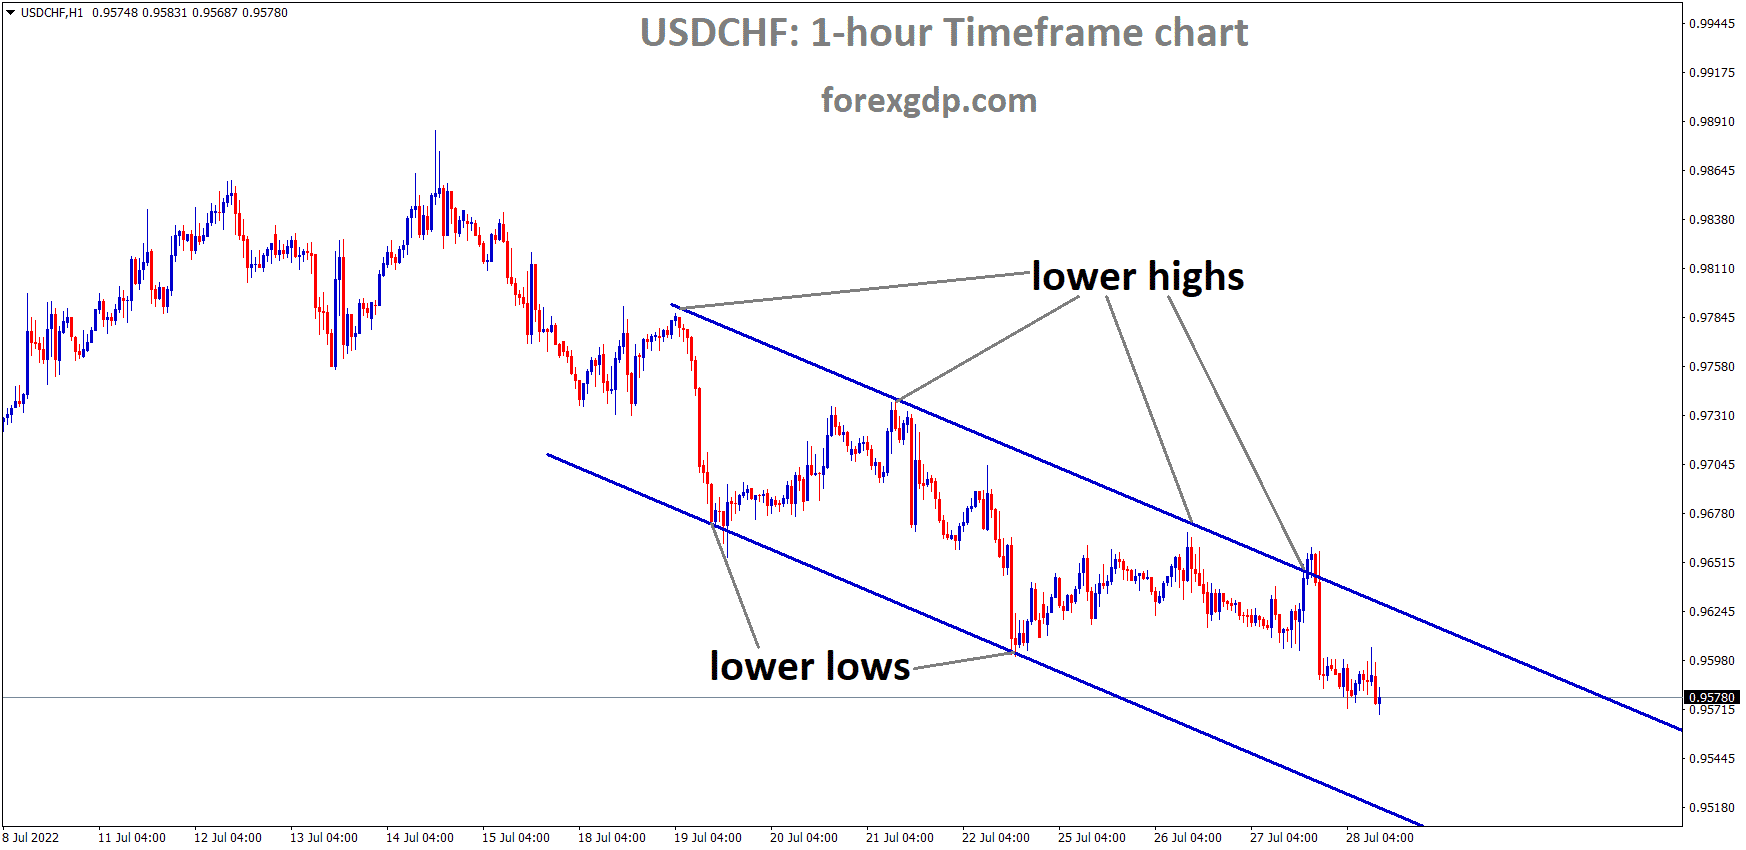 USDCHF is moving in the Descending channel and the market has Fallen from the Lower high area of the channel 2